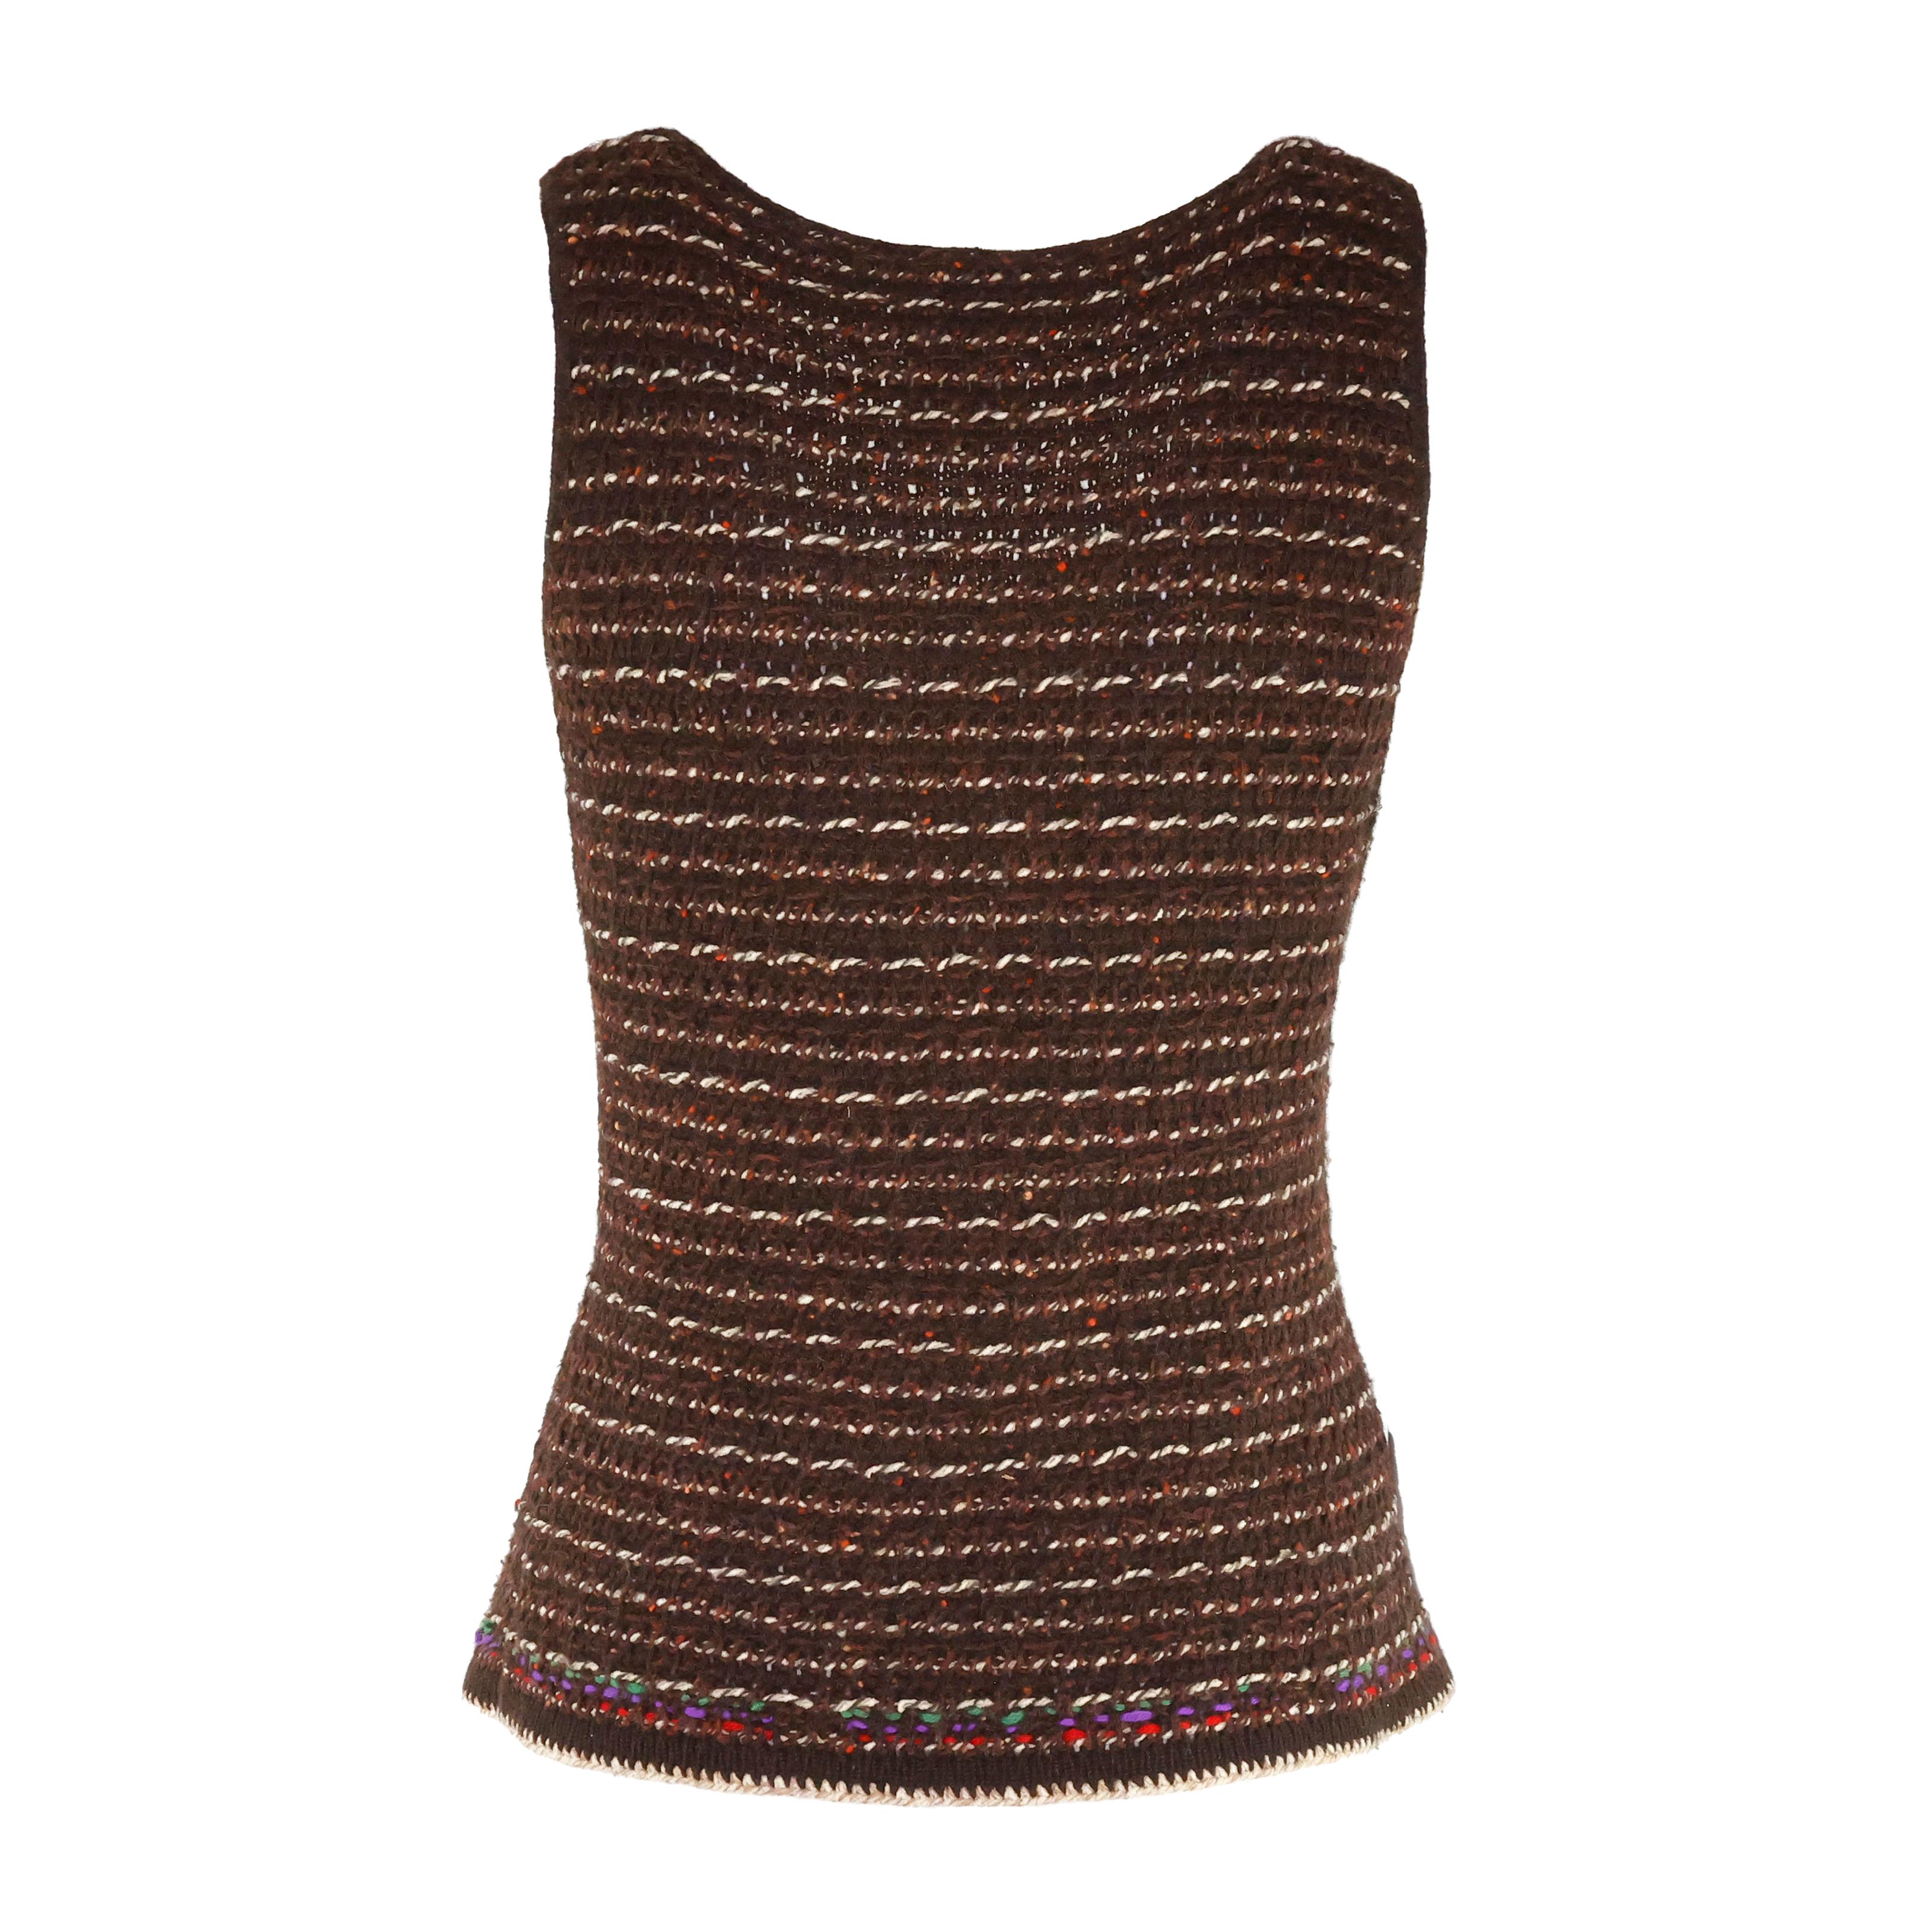 Chanel sleeveless top in cashmere color brown, with frontal CC metallic logo. Size 38 FR.

Condition:
Really good.